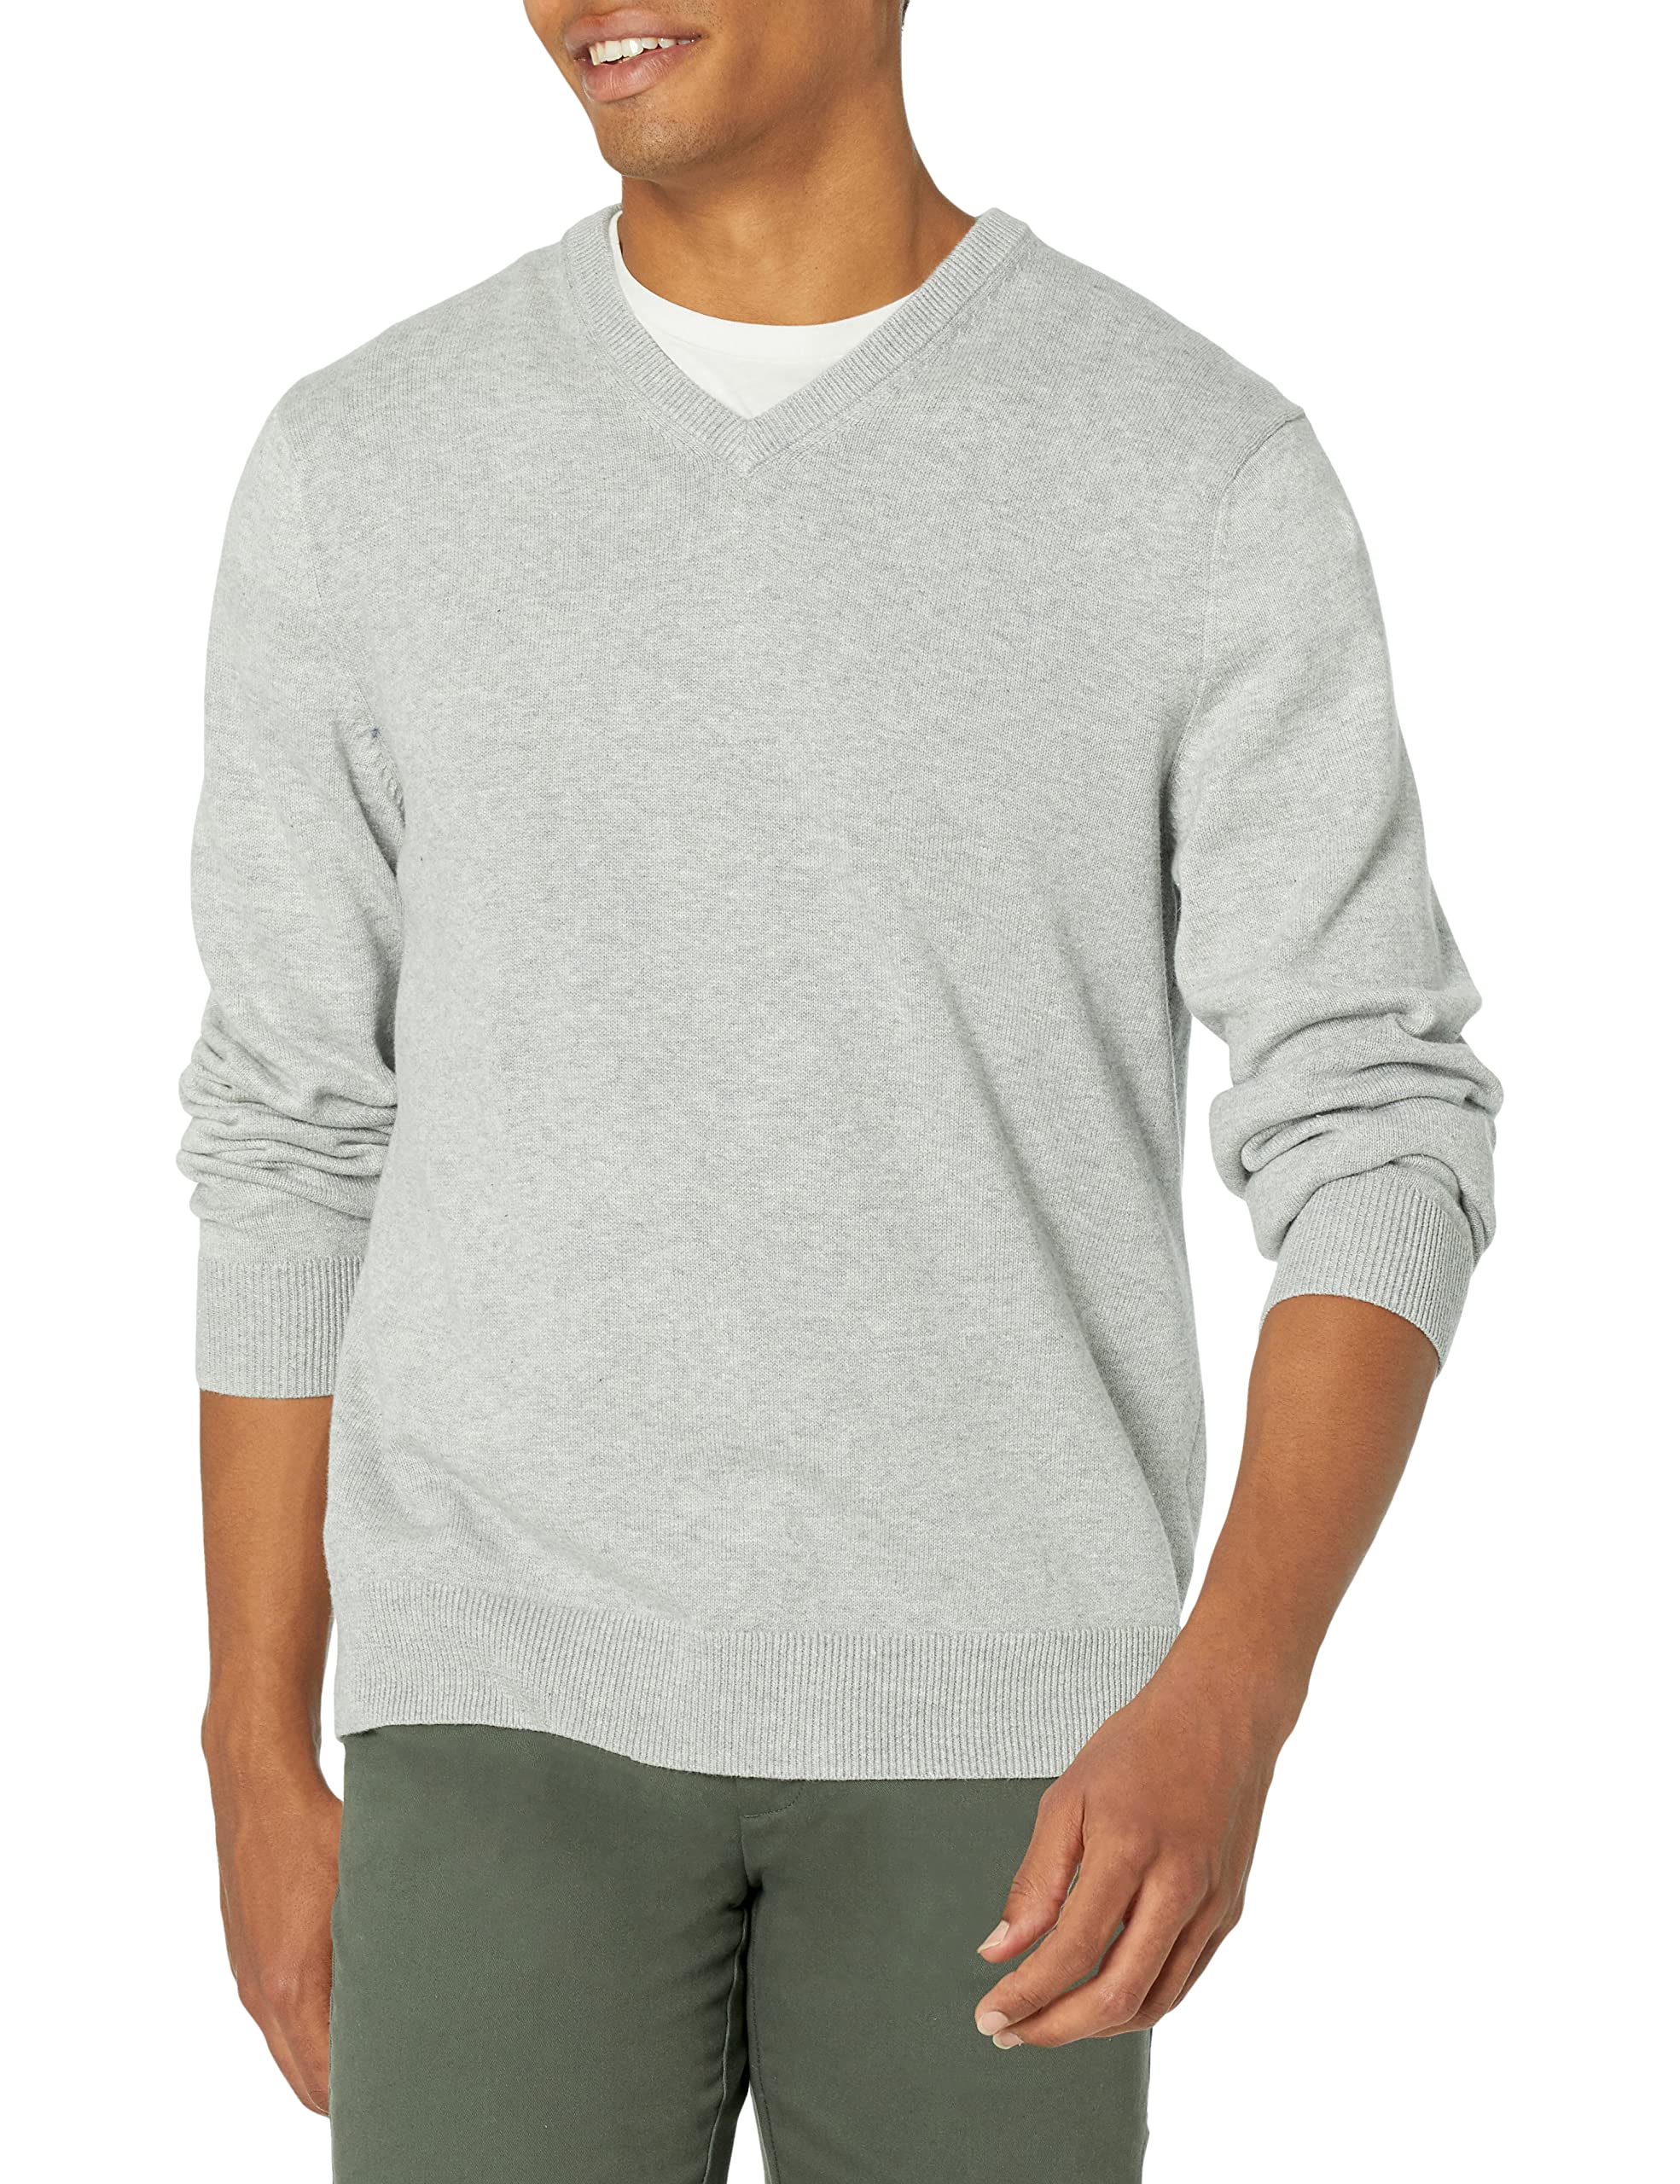 Amazon Essentials Men's V-Neck Sweater $8 + Free Shipping w/ Prime or on $35+